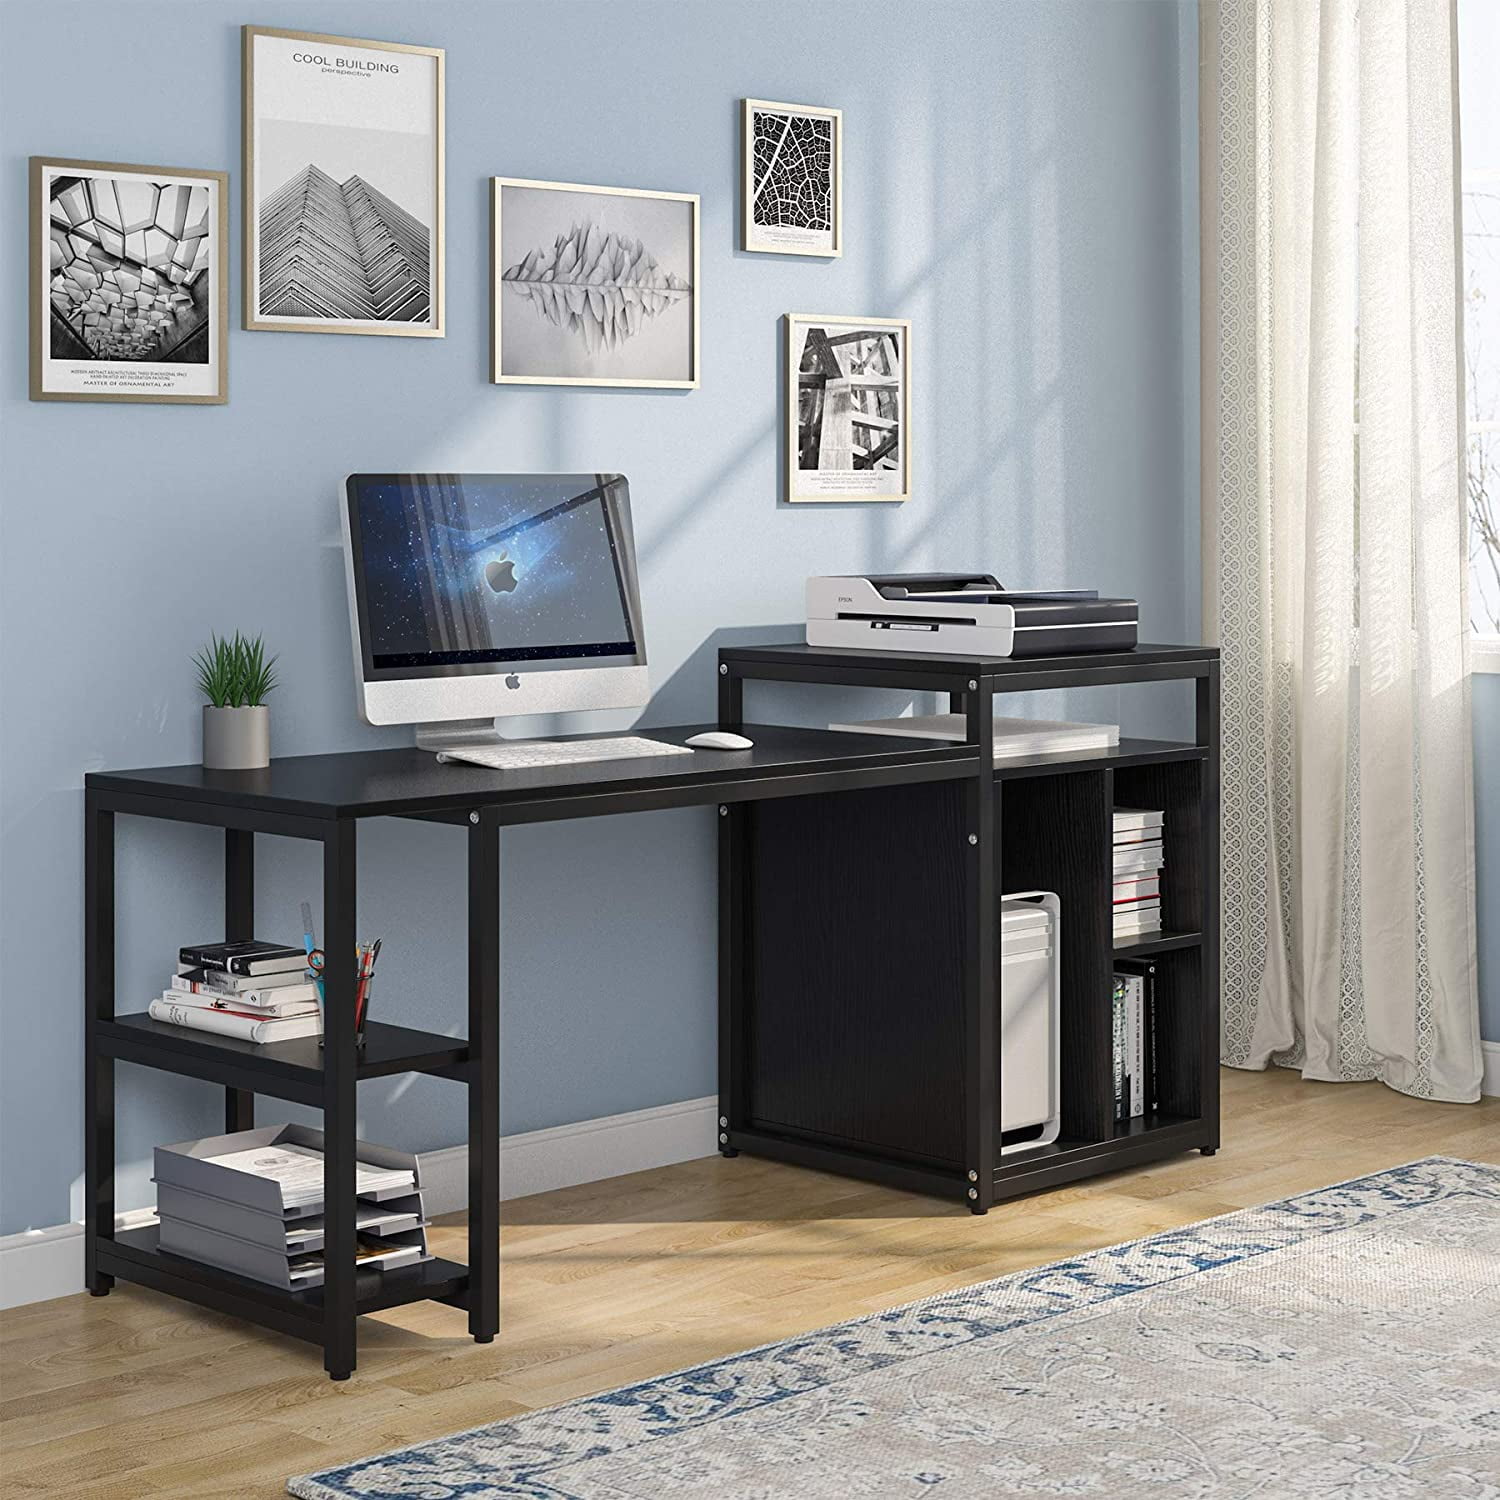 Tribesigns 47 Inch Computer Desk with Storage Shelves, Home Office Desk